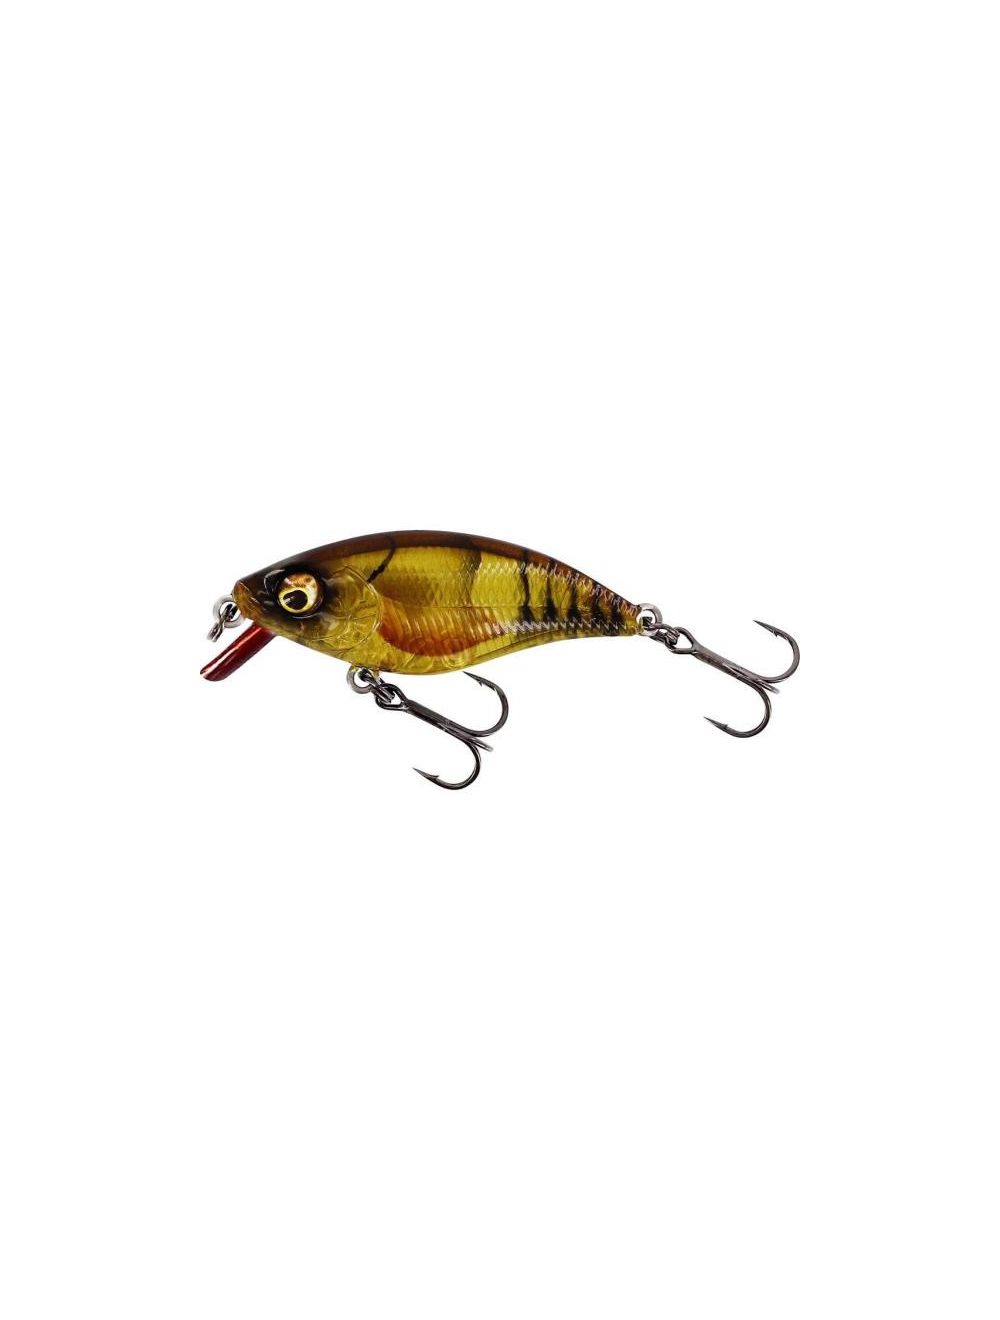  Basskiller Crankbaits Bass Lures 2.36in, Square Bill Crankbait,  Bass Fishing Lure, Floating Erratic Action Muskie Fishing Lures，3D Eyes  Fishing Gear Trout Lure for Shallow Water，Freshwater，Saltwater : Sports &  Outdoors